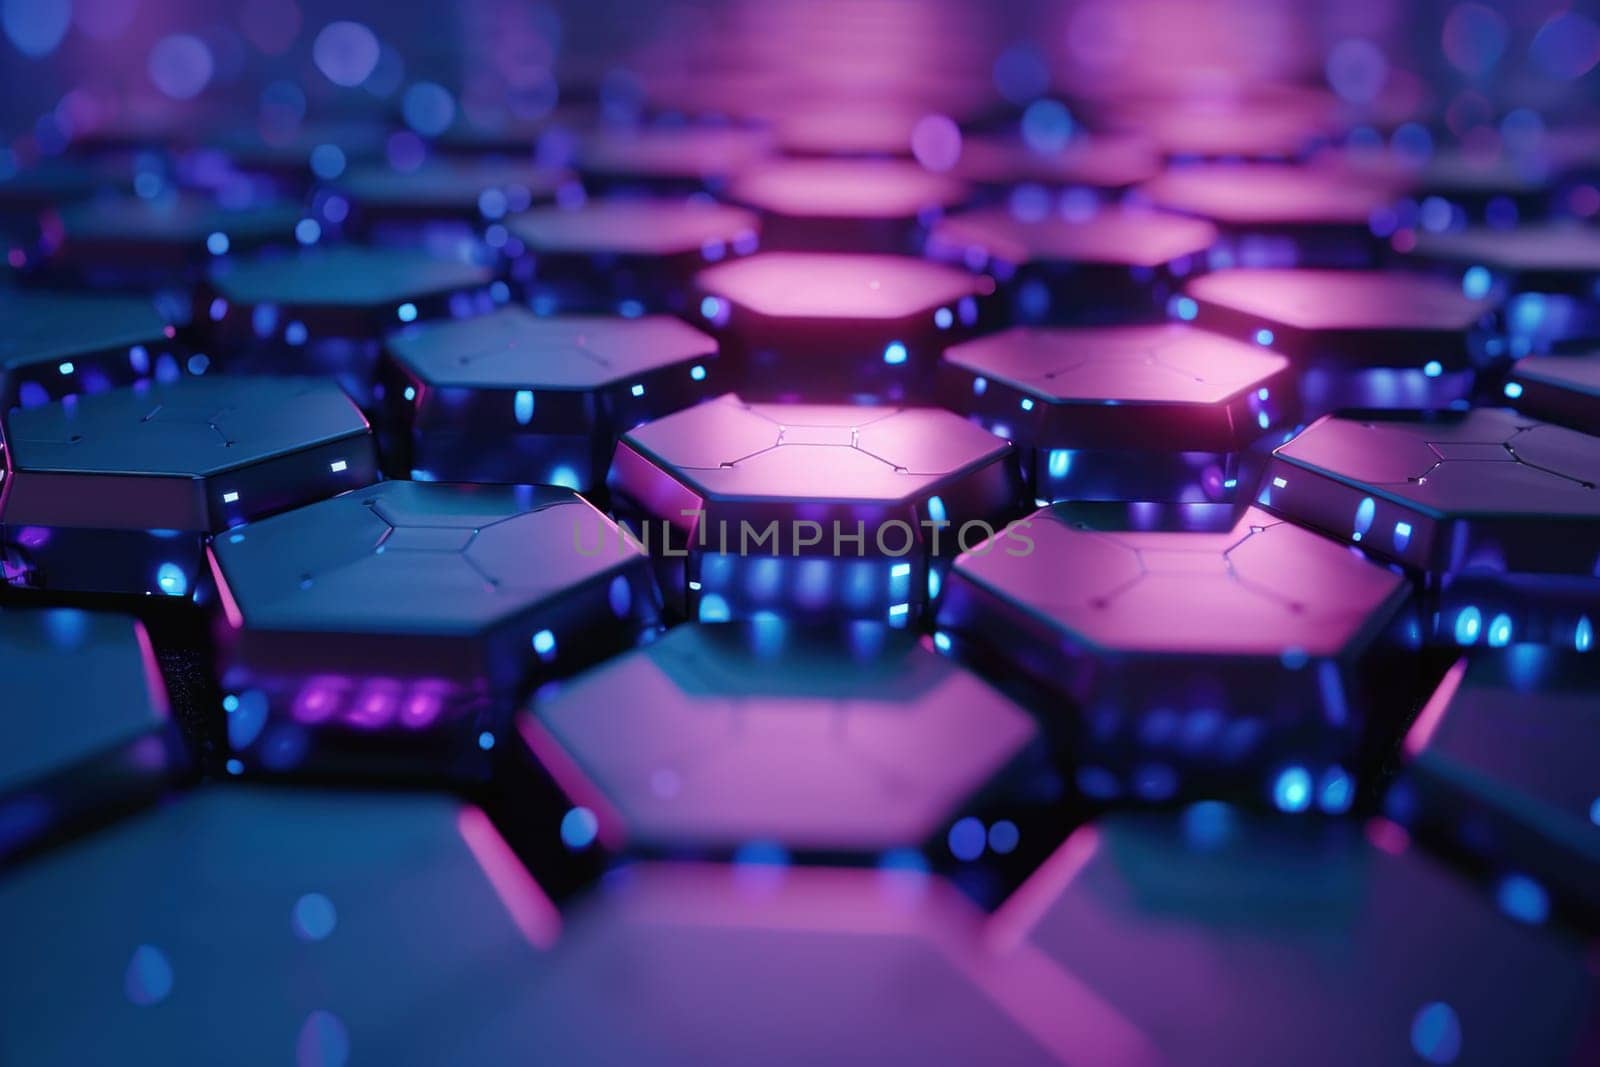 A close up of a purple and blue hexagons by golfmerrymaker